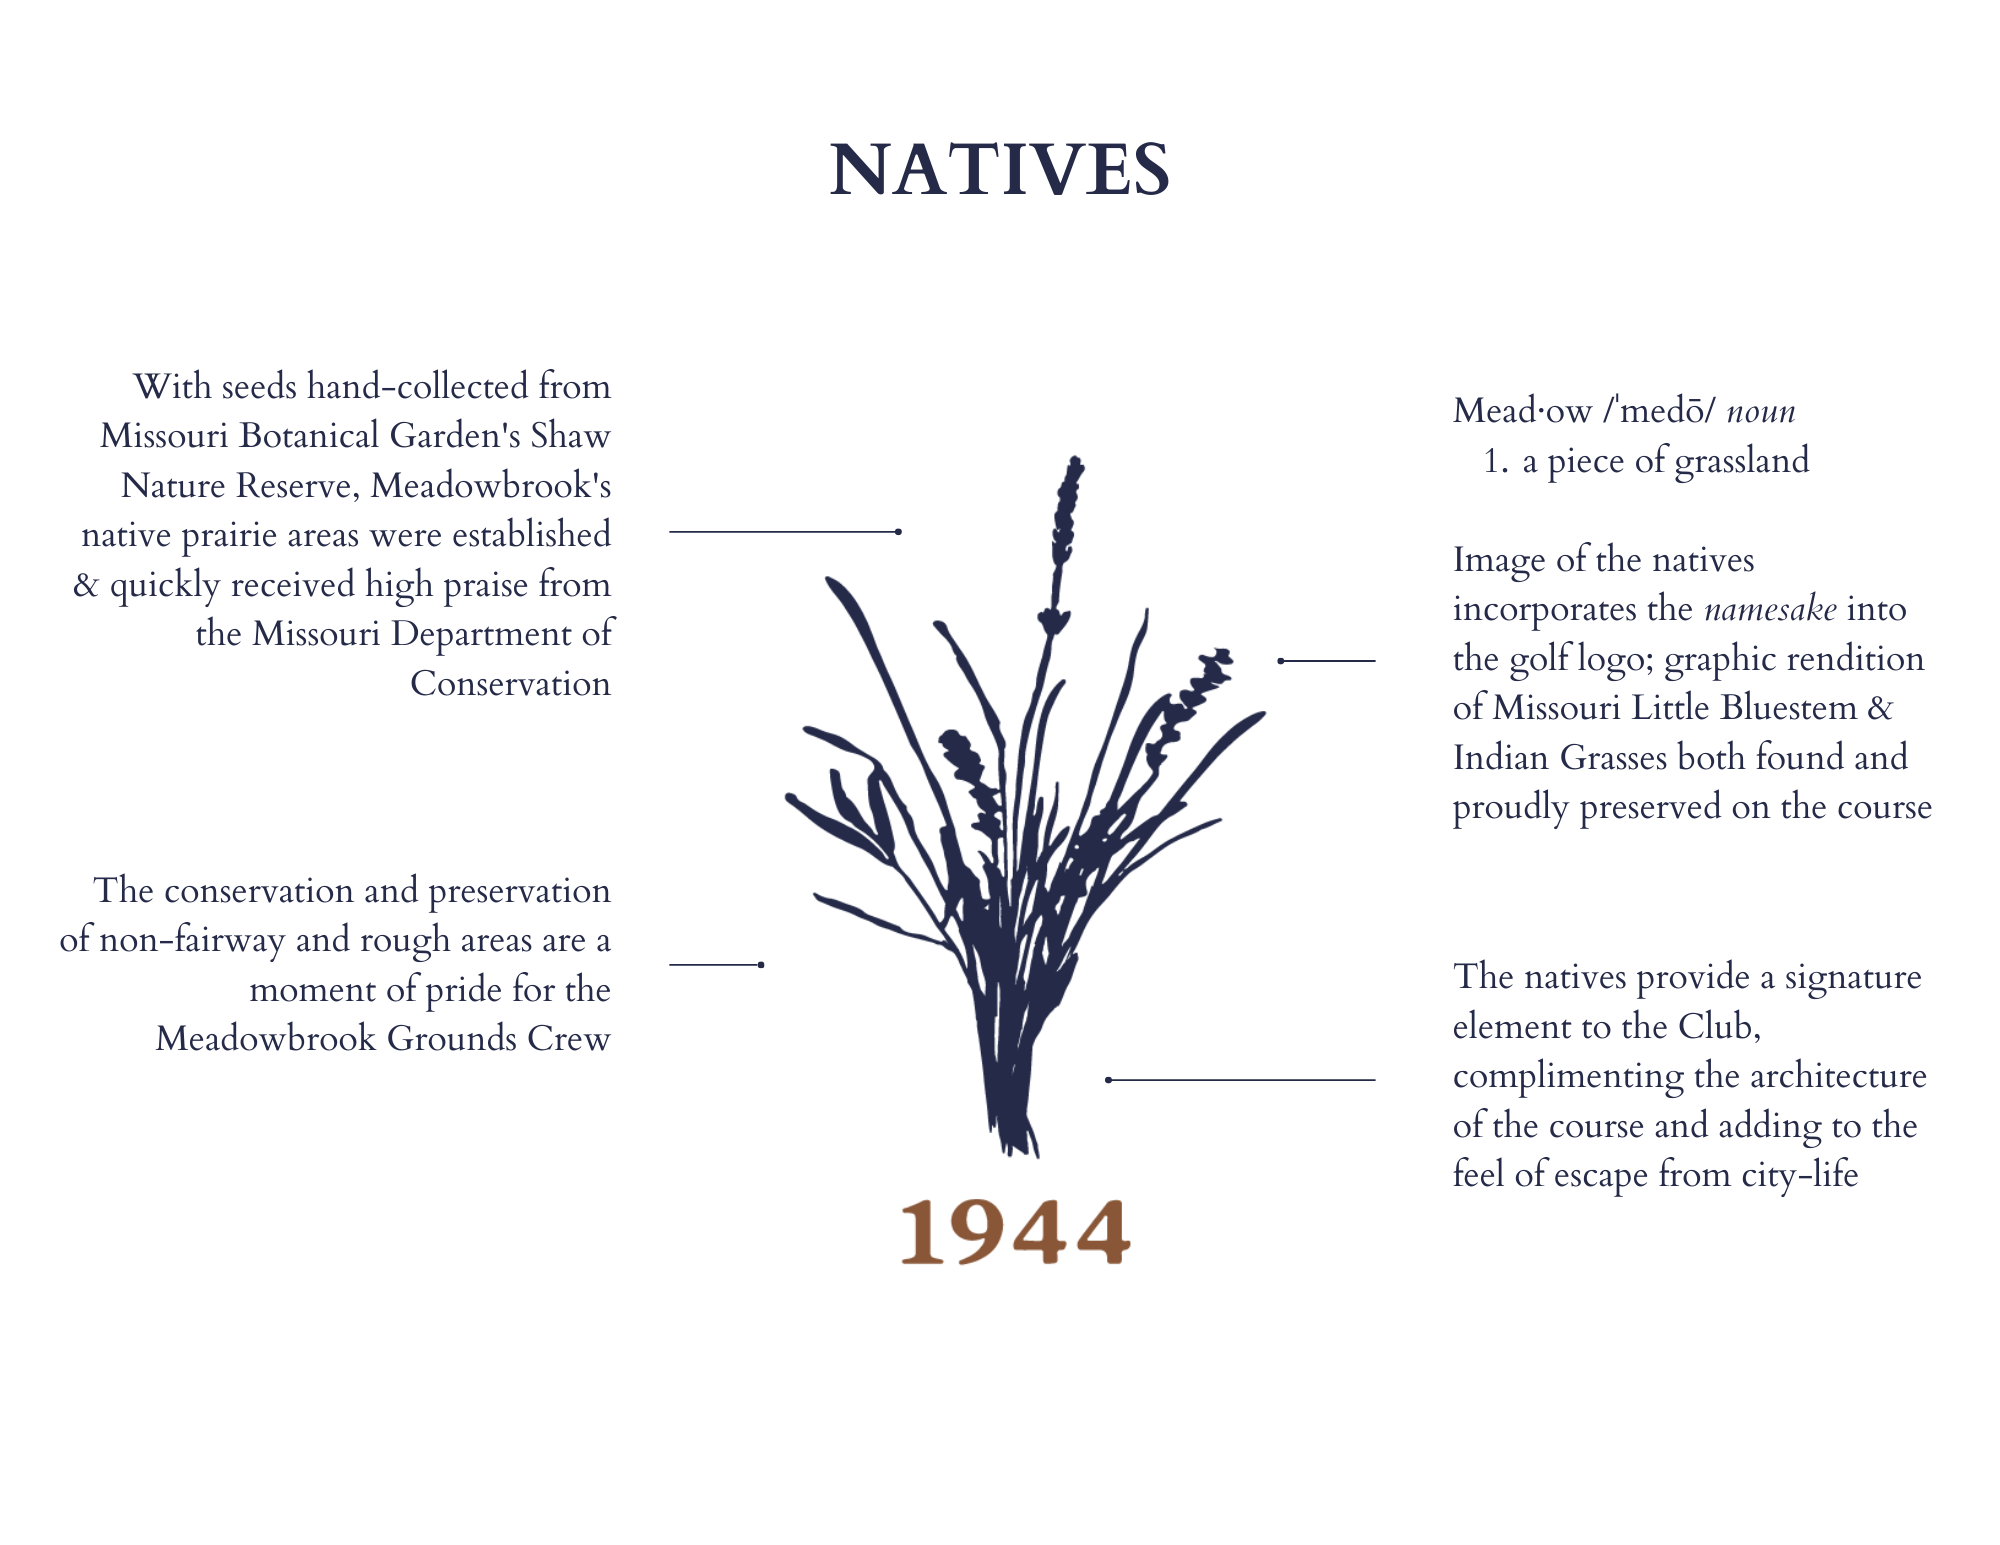 Natives_Logo_(The_Course_Page)